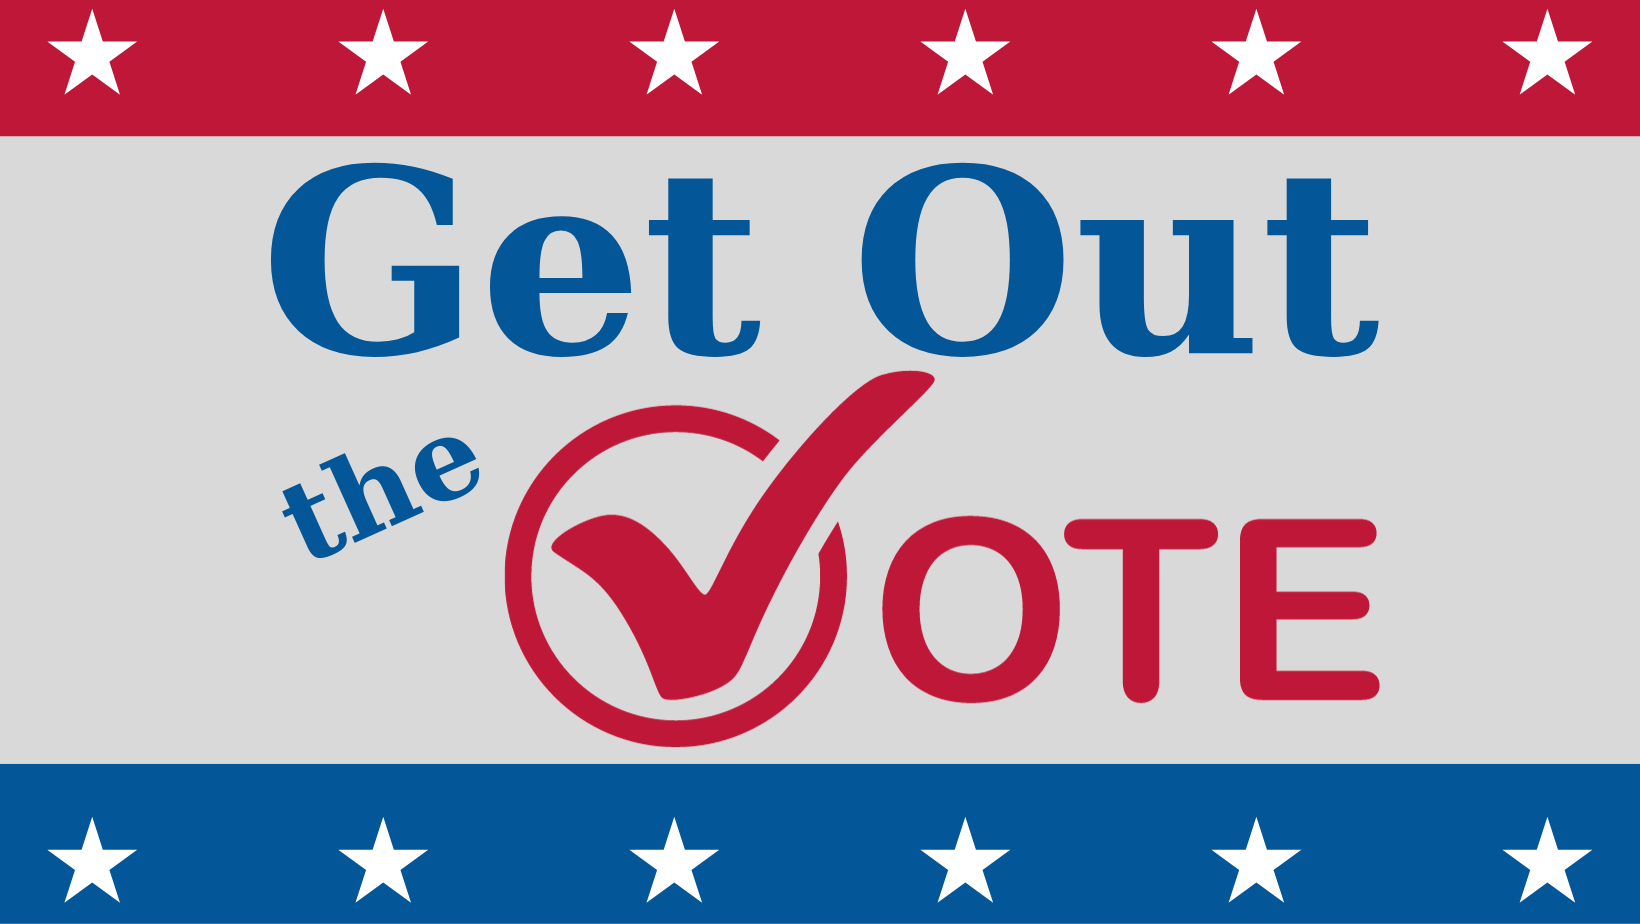 Get Out the Vote in blue and red text on a gray to white background with a red bar with white stars along the top and blue bar with white stars along the bottom